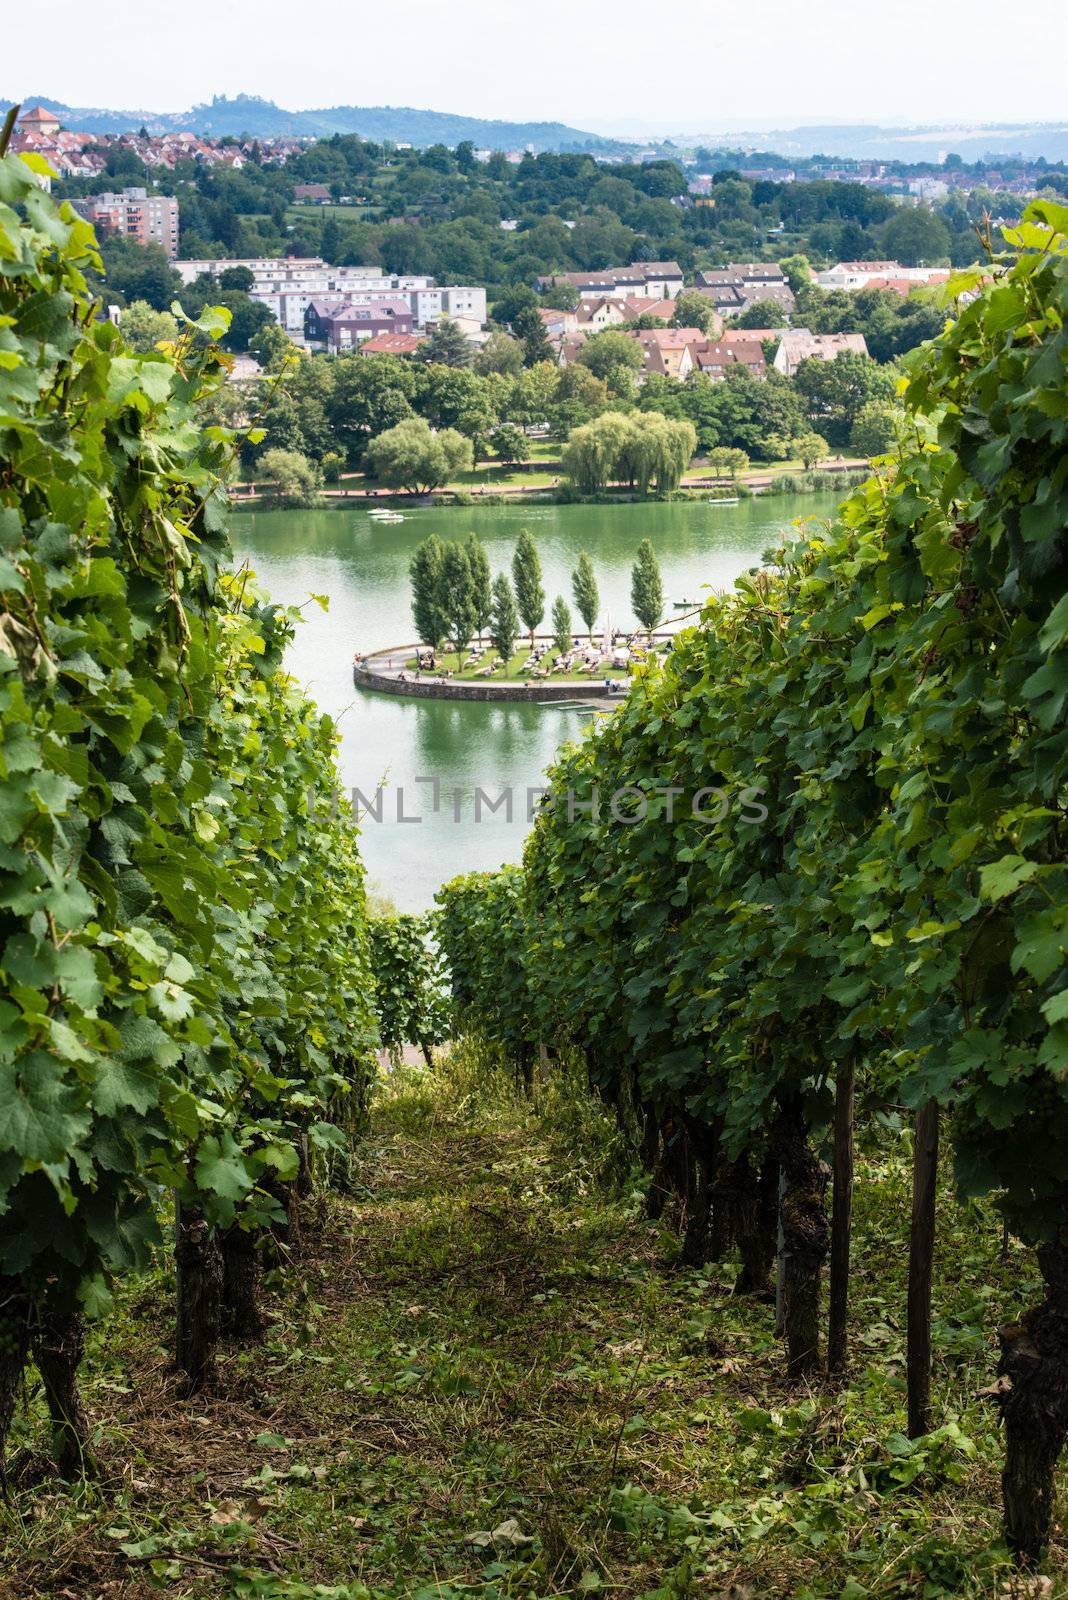 Vineyards in Stuttart - Bad Cannstatt: Very steep hills along river Neckar with the Max-Eyth See (lake) in the background